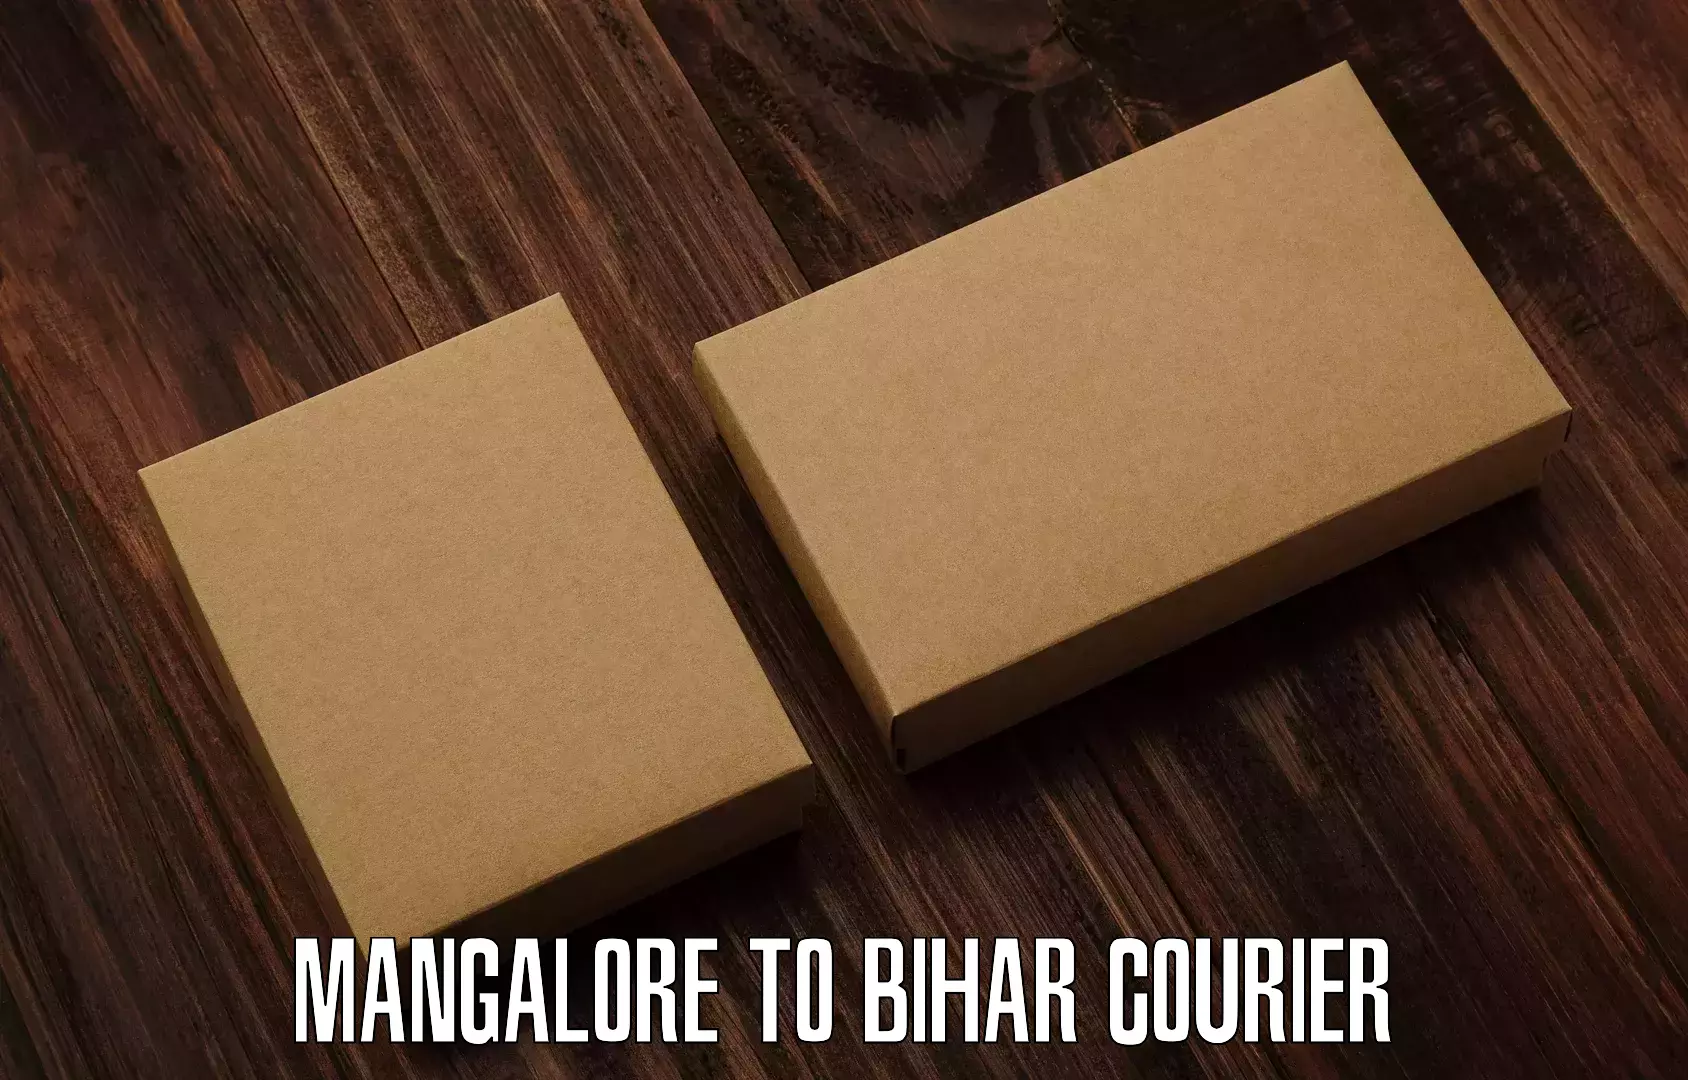 Courier service efficiency Mangalore to Marhowrah